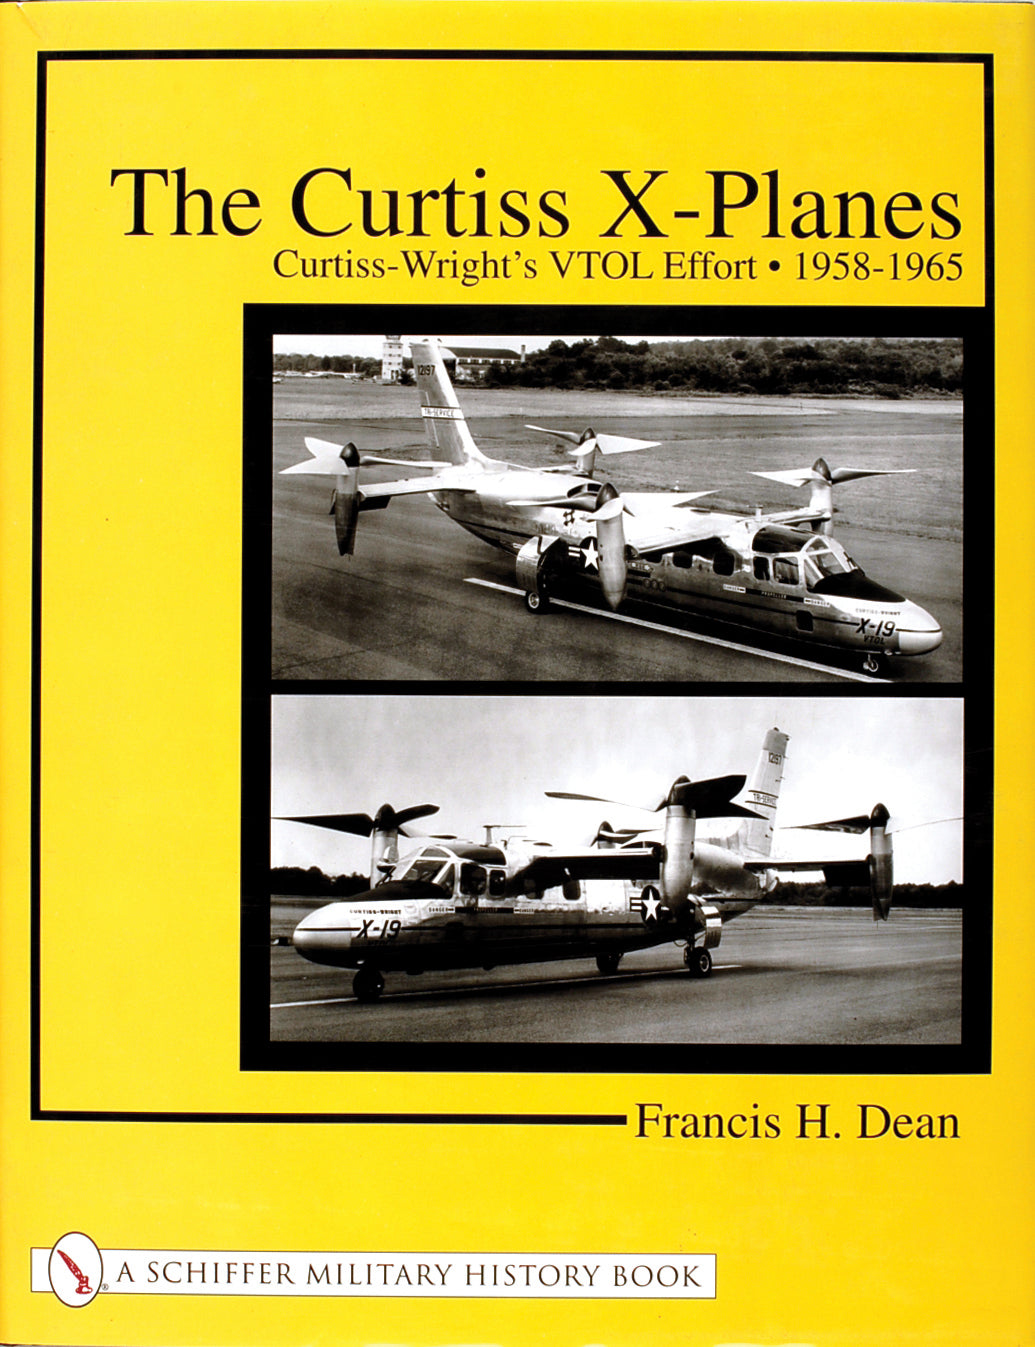 The Curtiss X-Planes